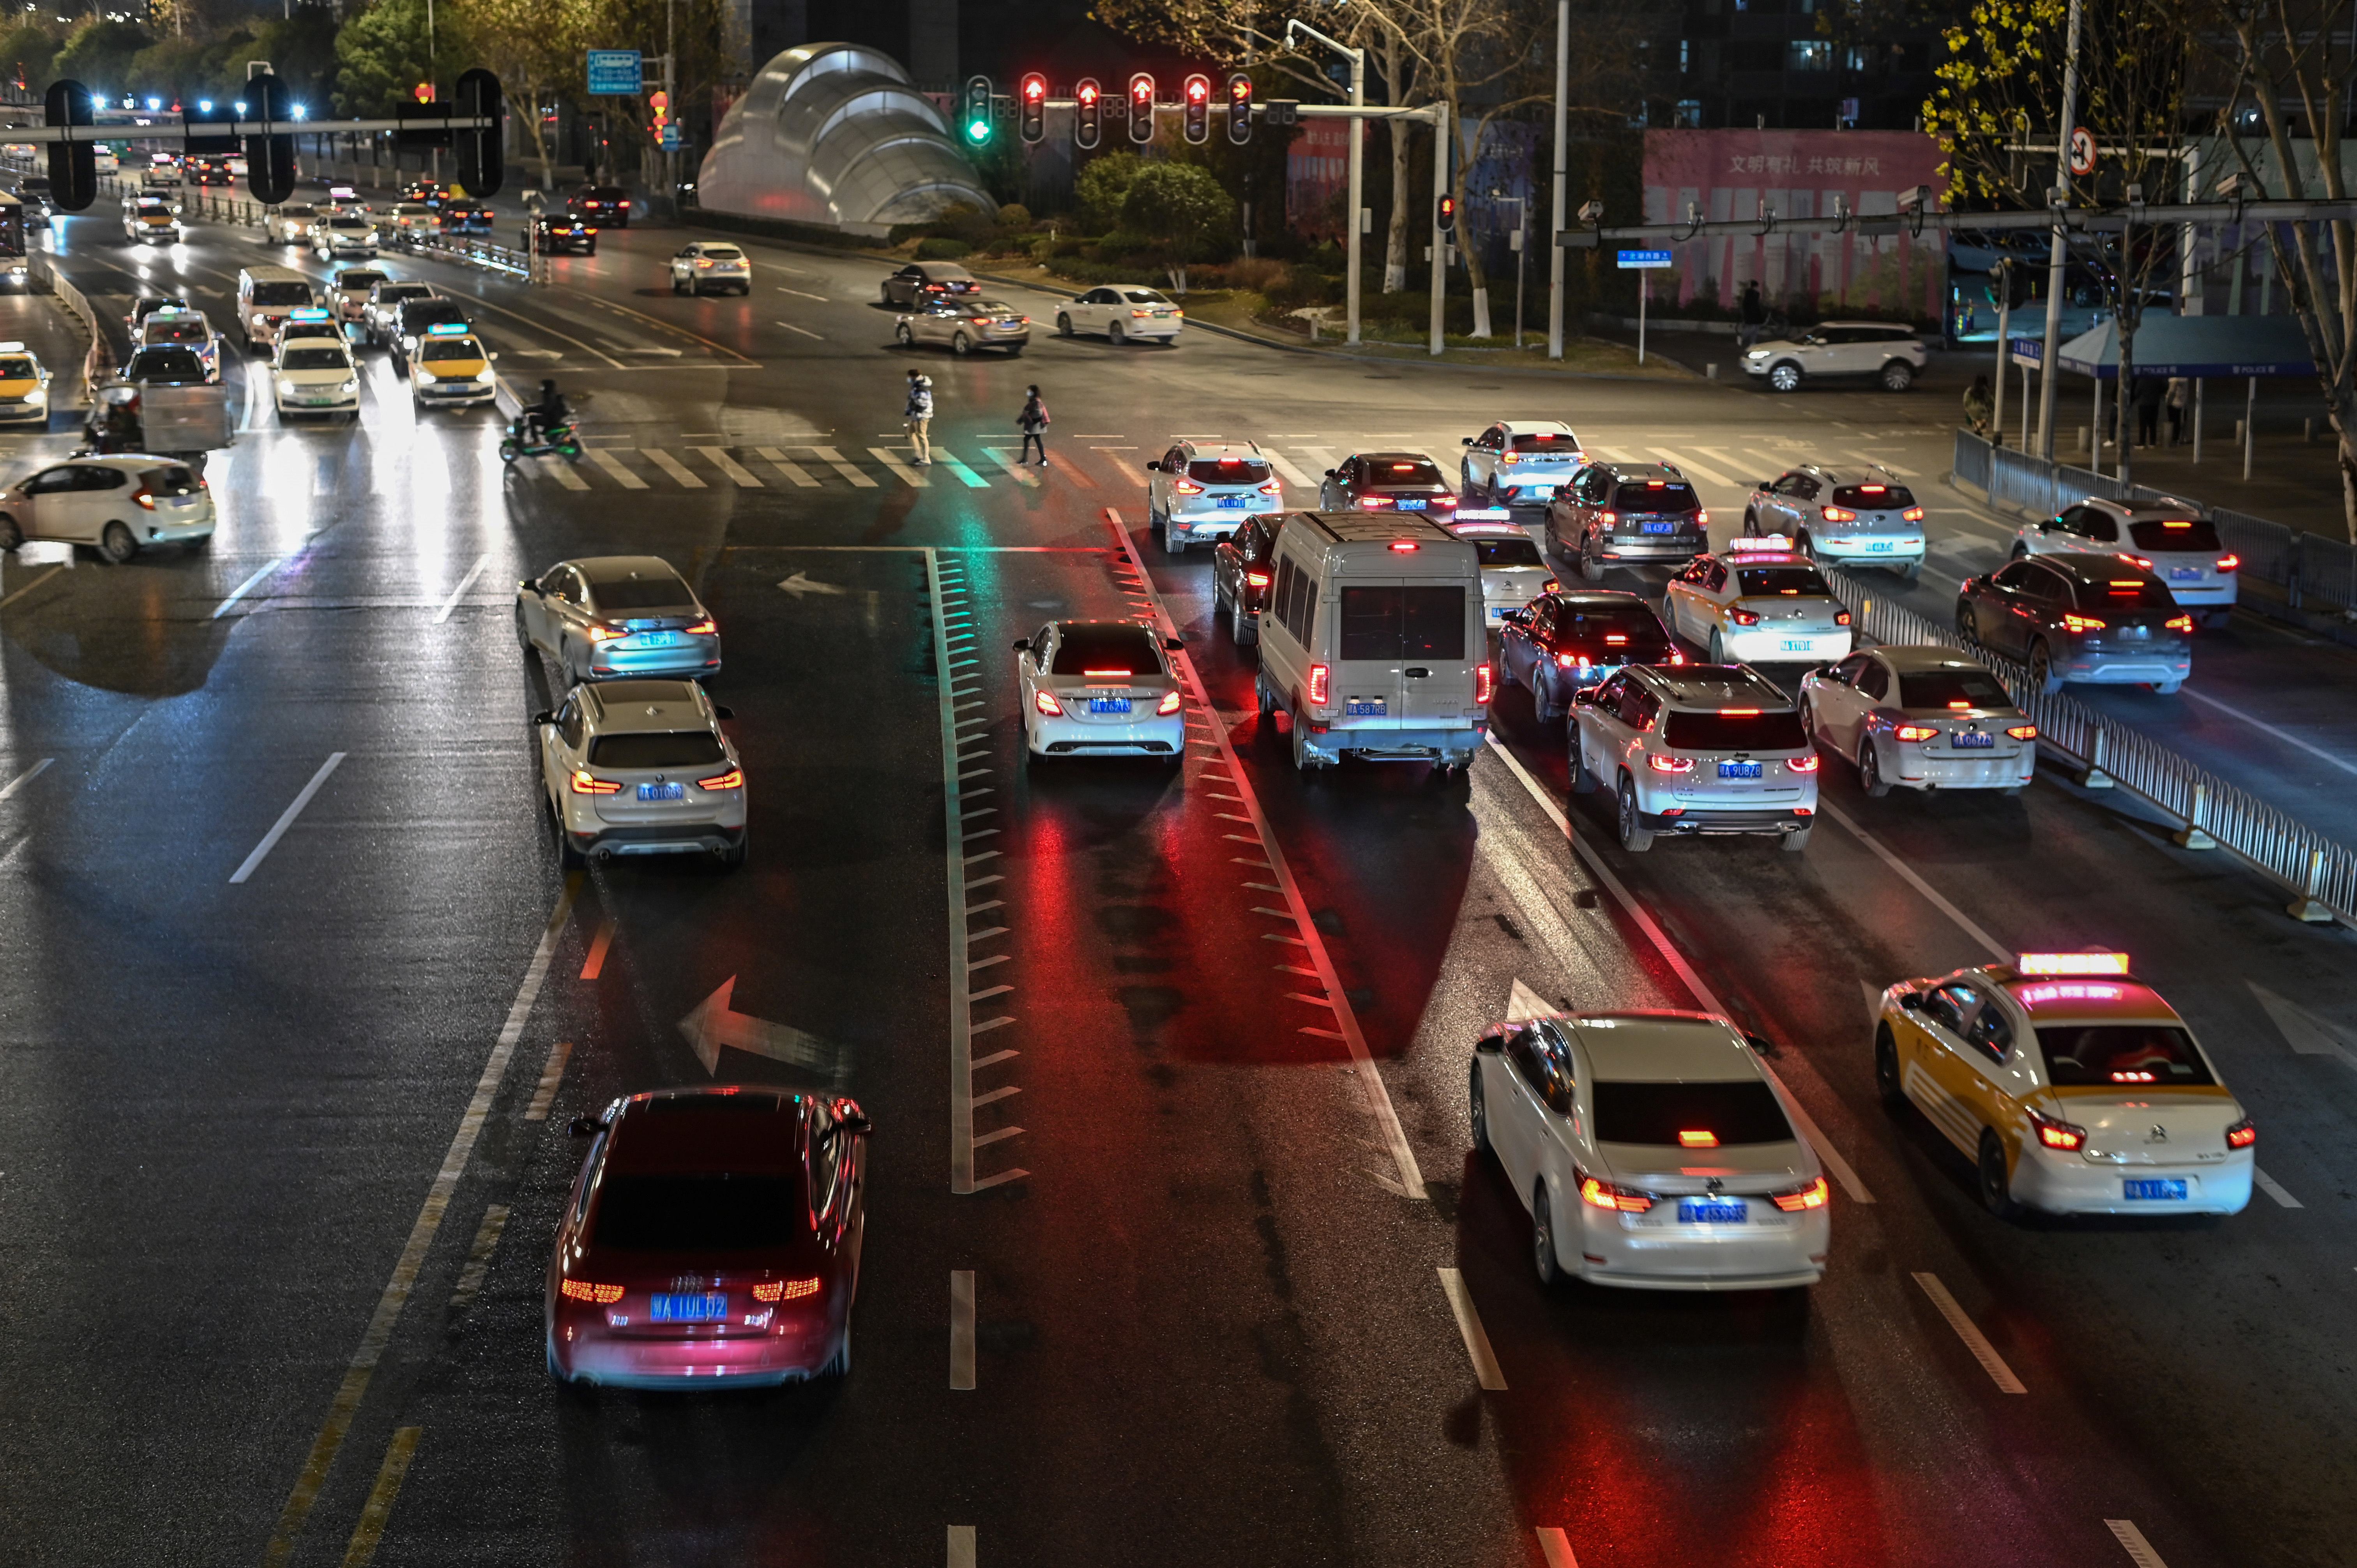 File: This photo taken on 19 January 2021 shows a general view of traffic stopped at a red light on a street in Wuhan, China